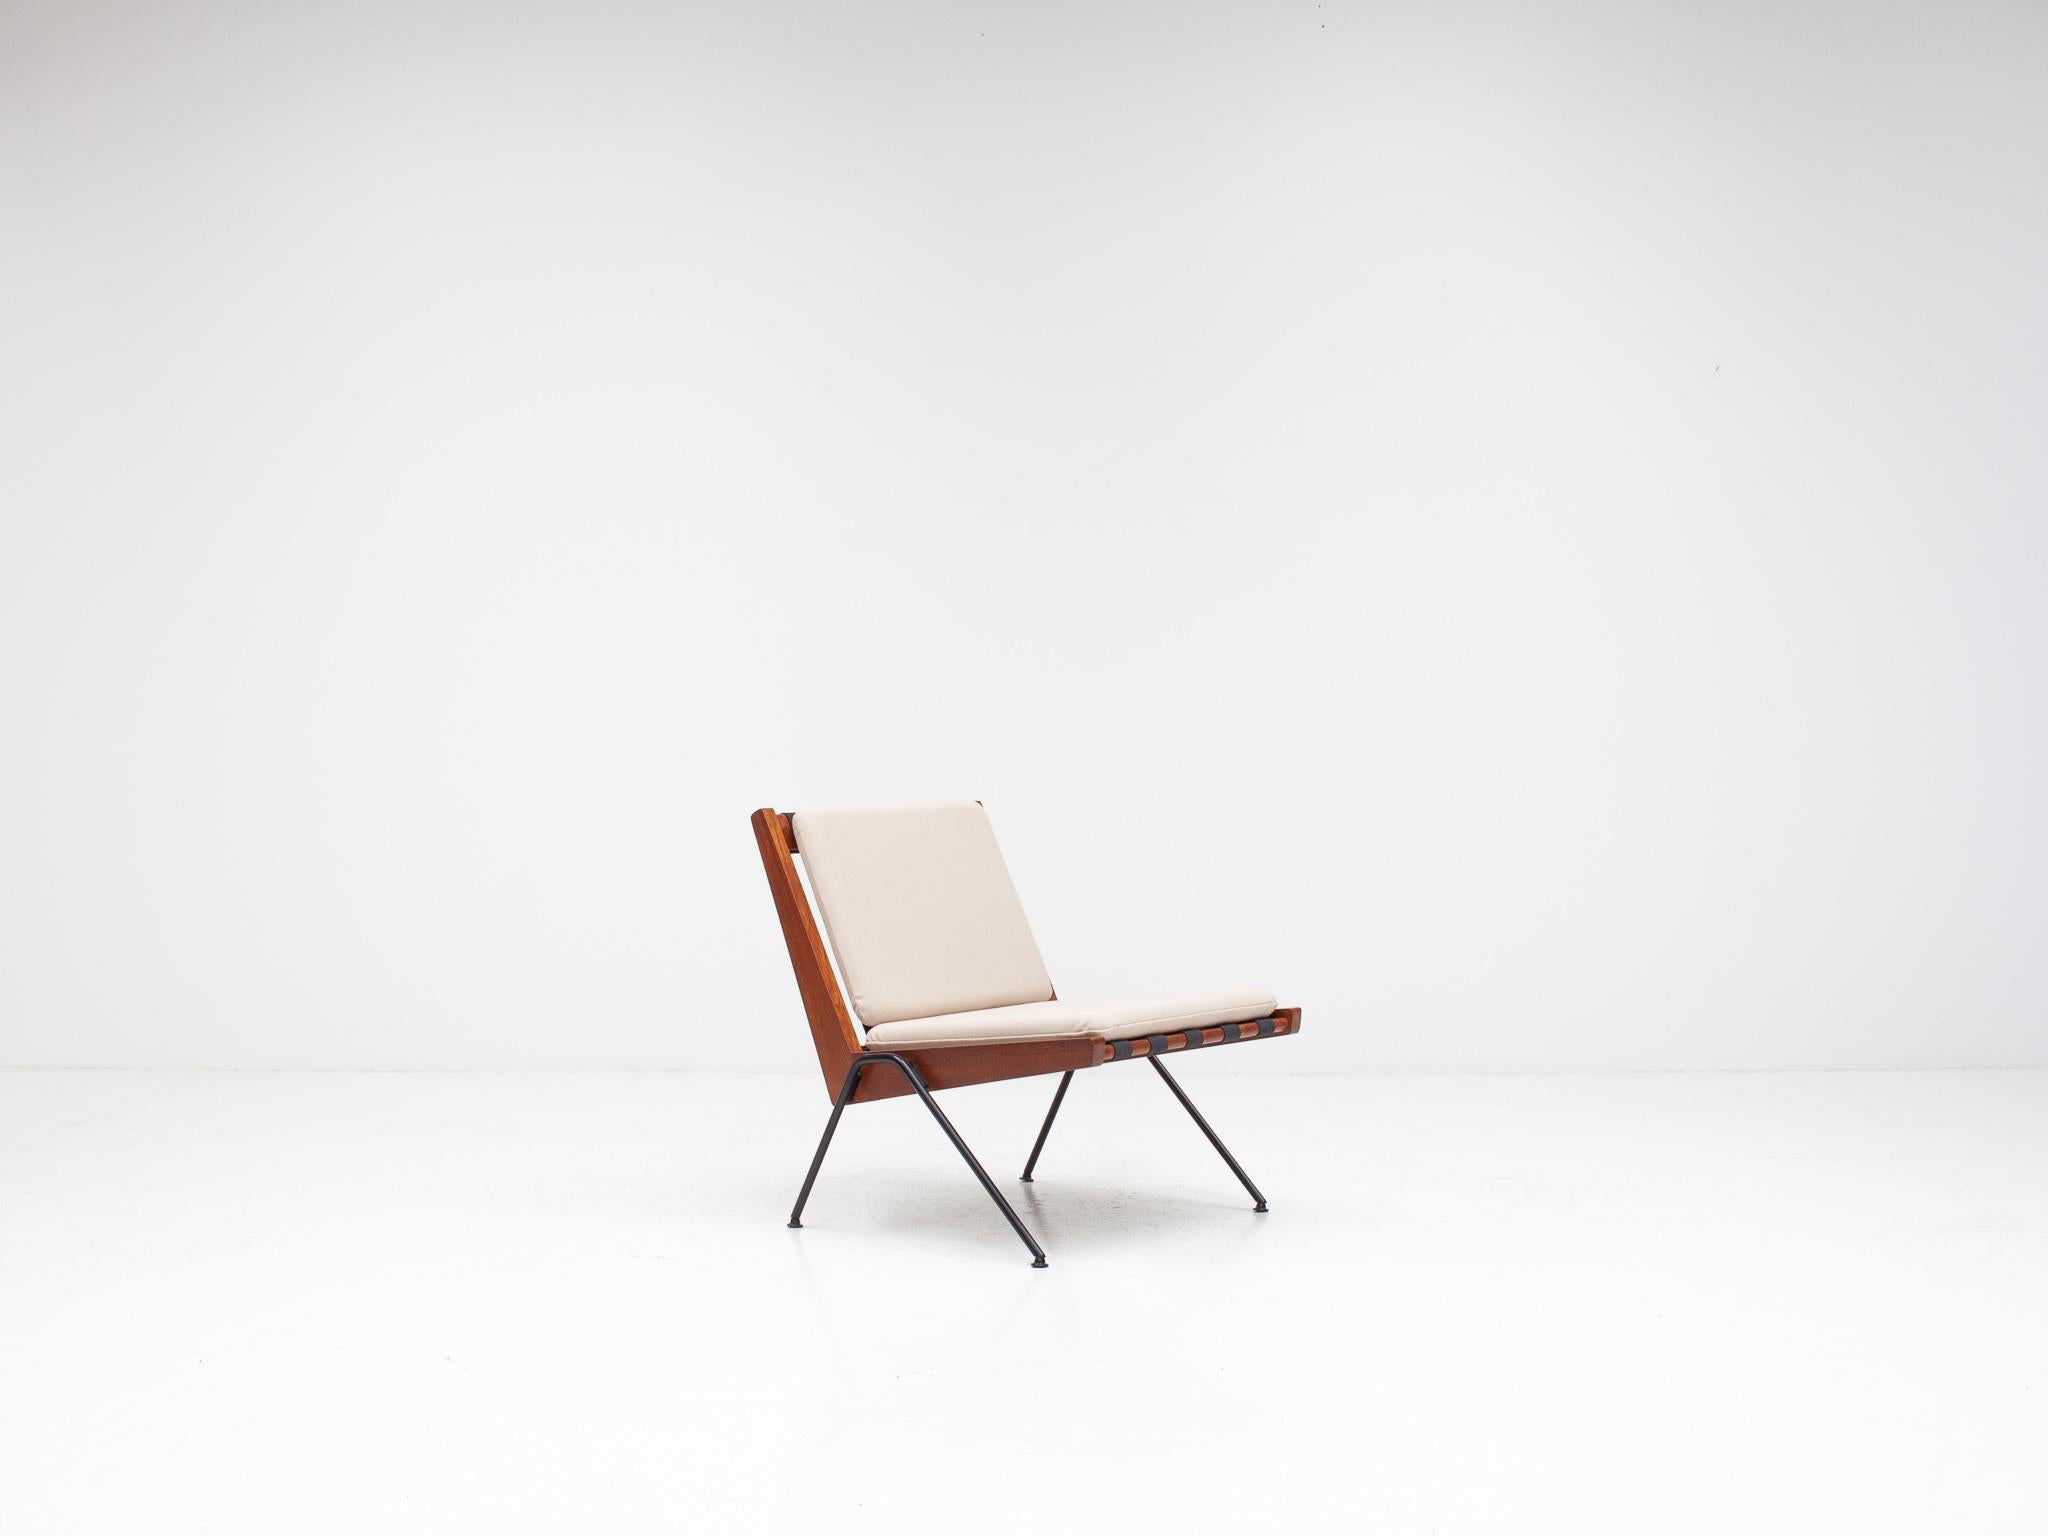 A scarce, original, open teak frame Robin Day 'Chevron' chair for Hille, designed in 1959 - the piece has new foam cushions covered in Kvadrat fabric.

Constructed of tubular legs and chevron-shaped teak frame along with exposed black webbing the